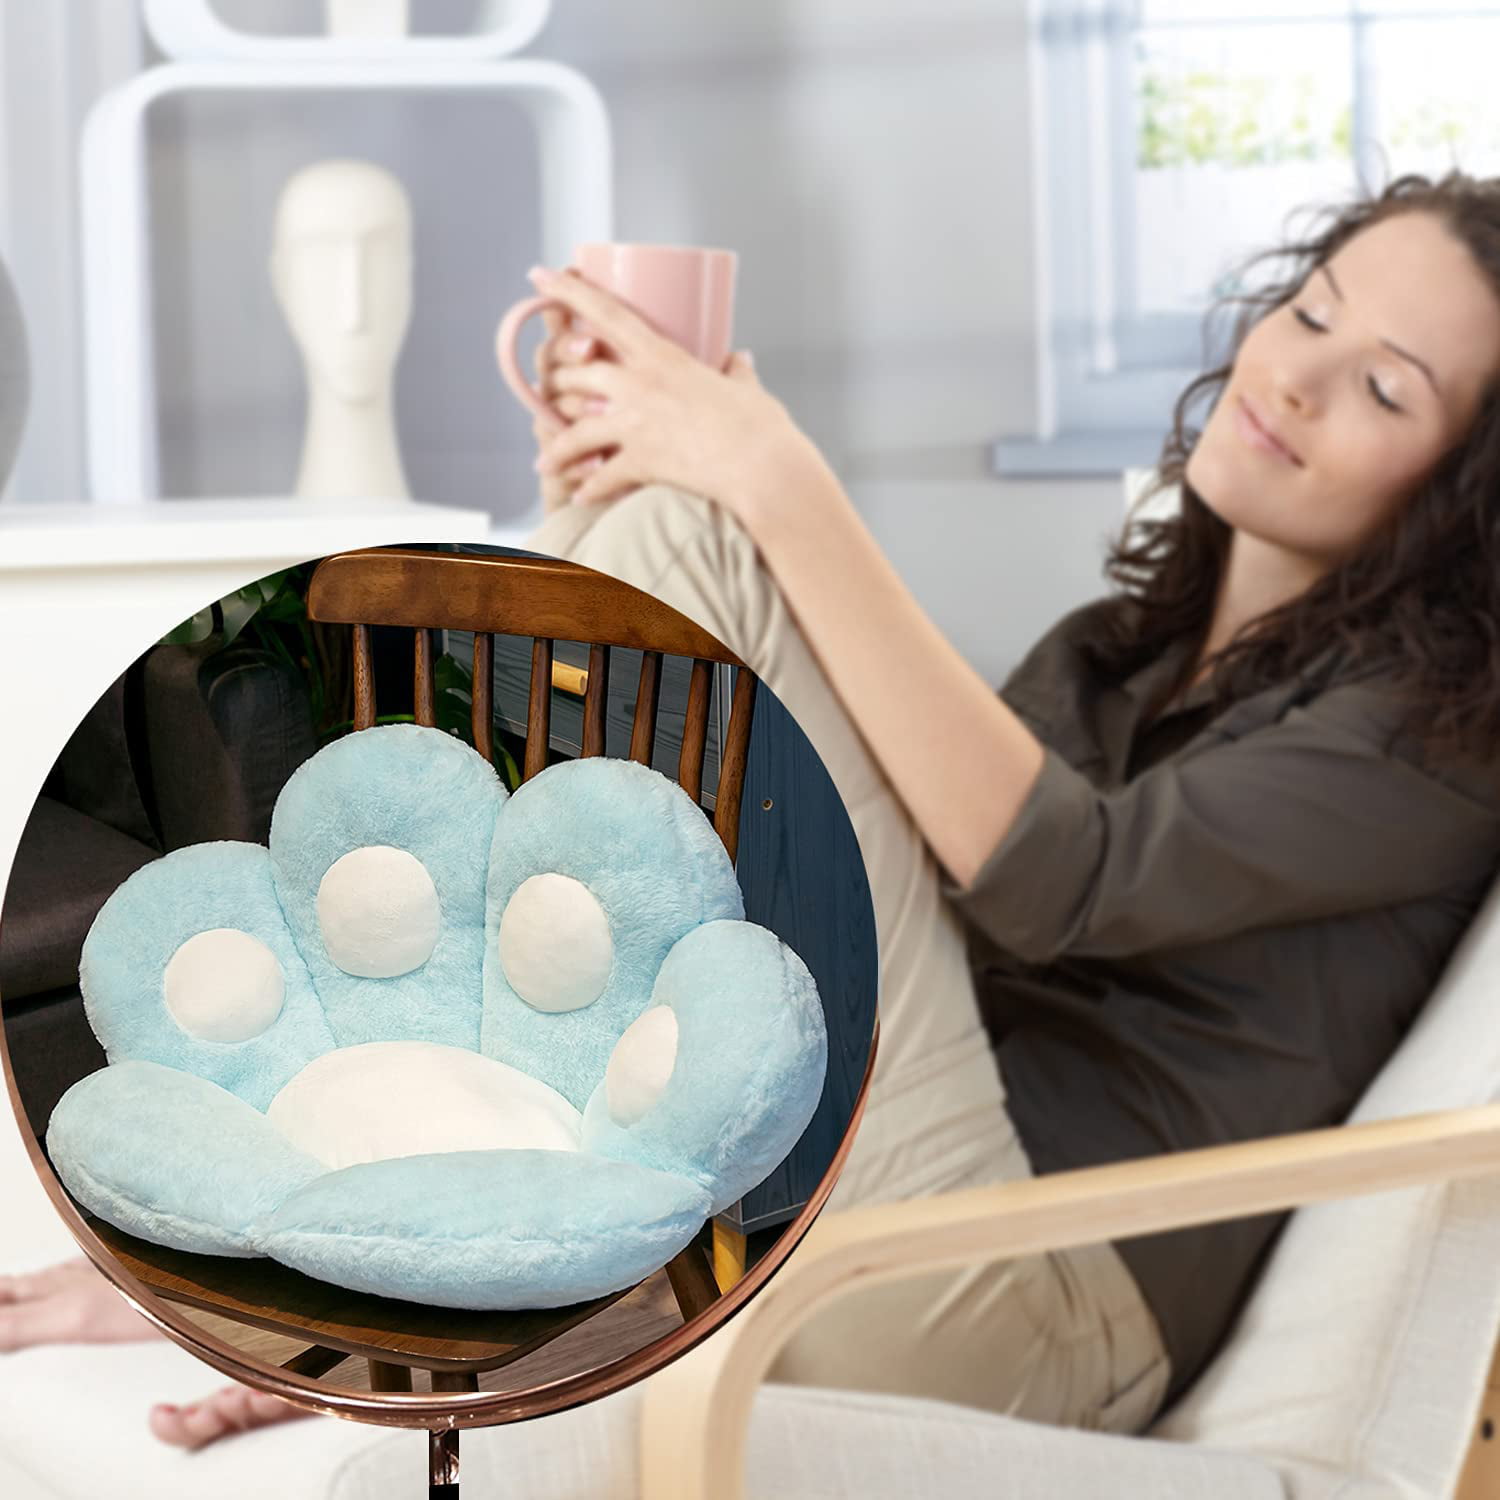 Sit Comfortably with Cat Shape Chair Cushion